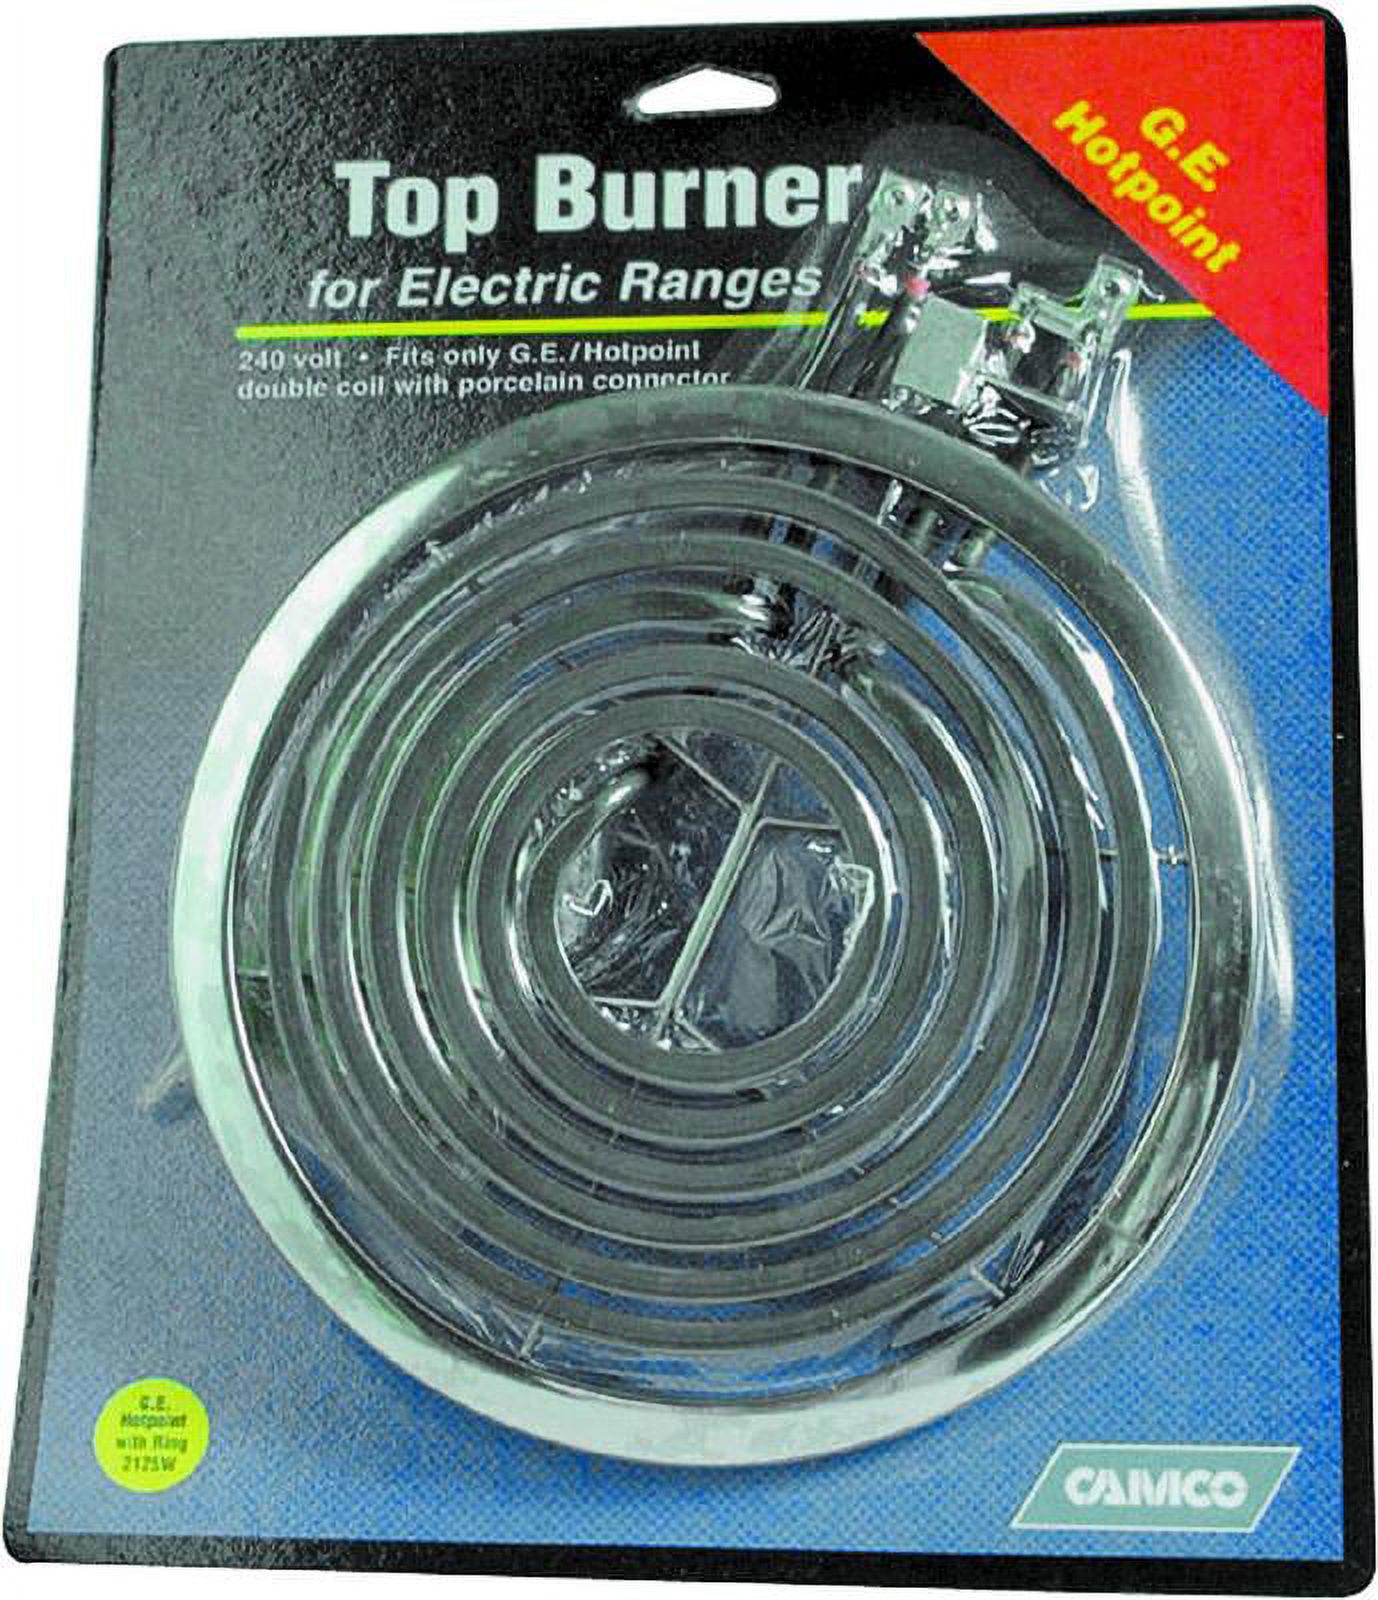 Camco 00193 Ge Hotpoint 9 Inch Electric Range Top Burner Ge,Each - image 1 of 1